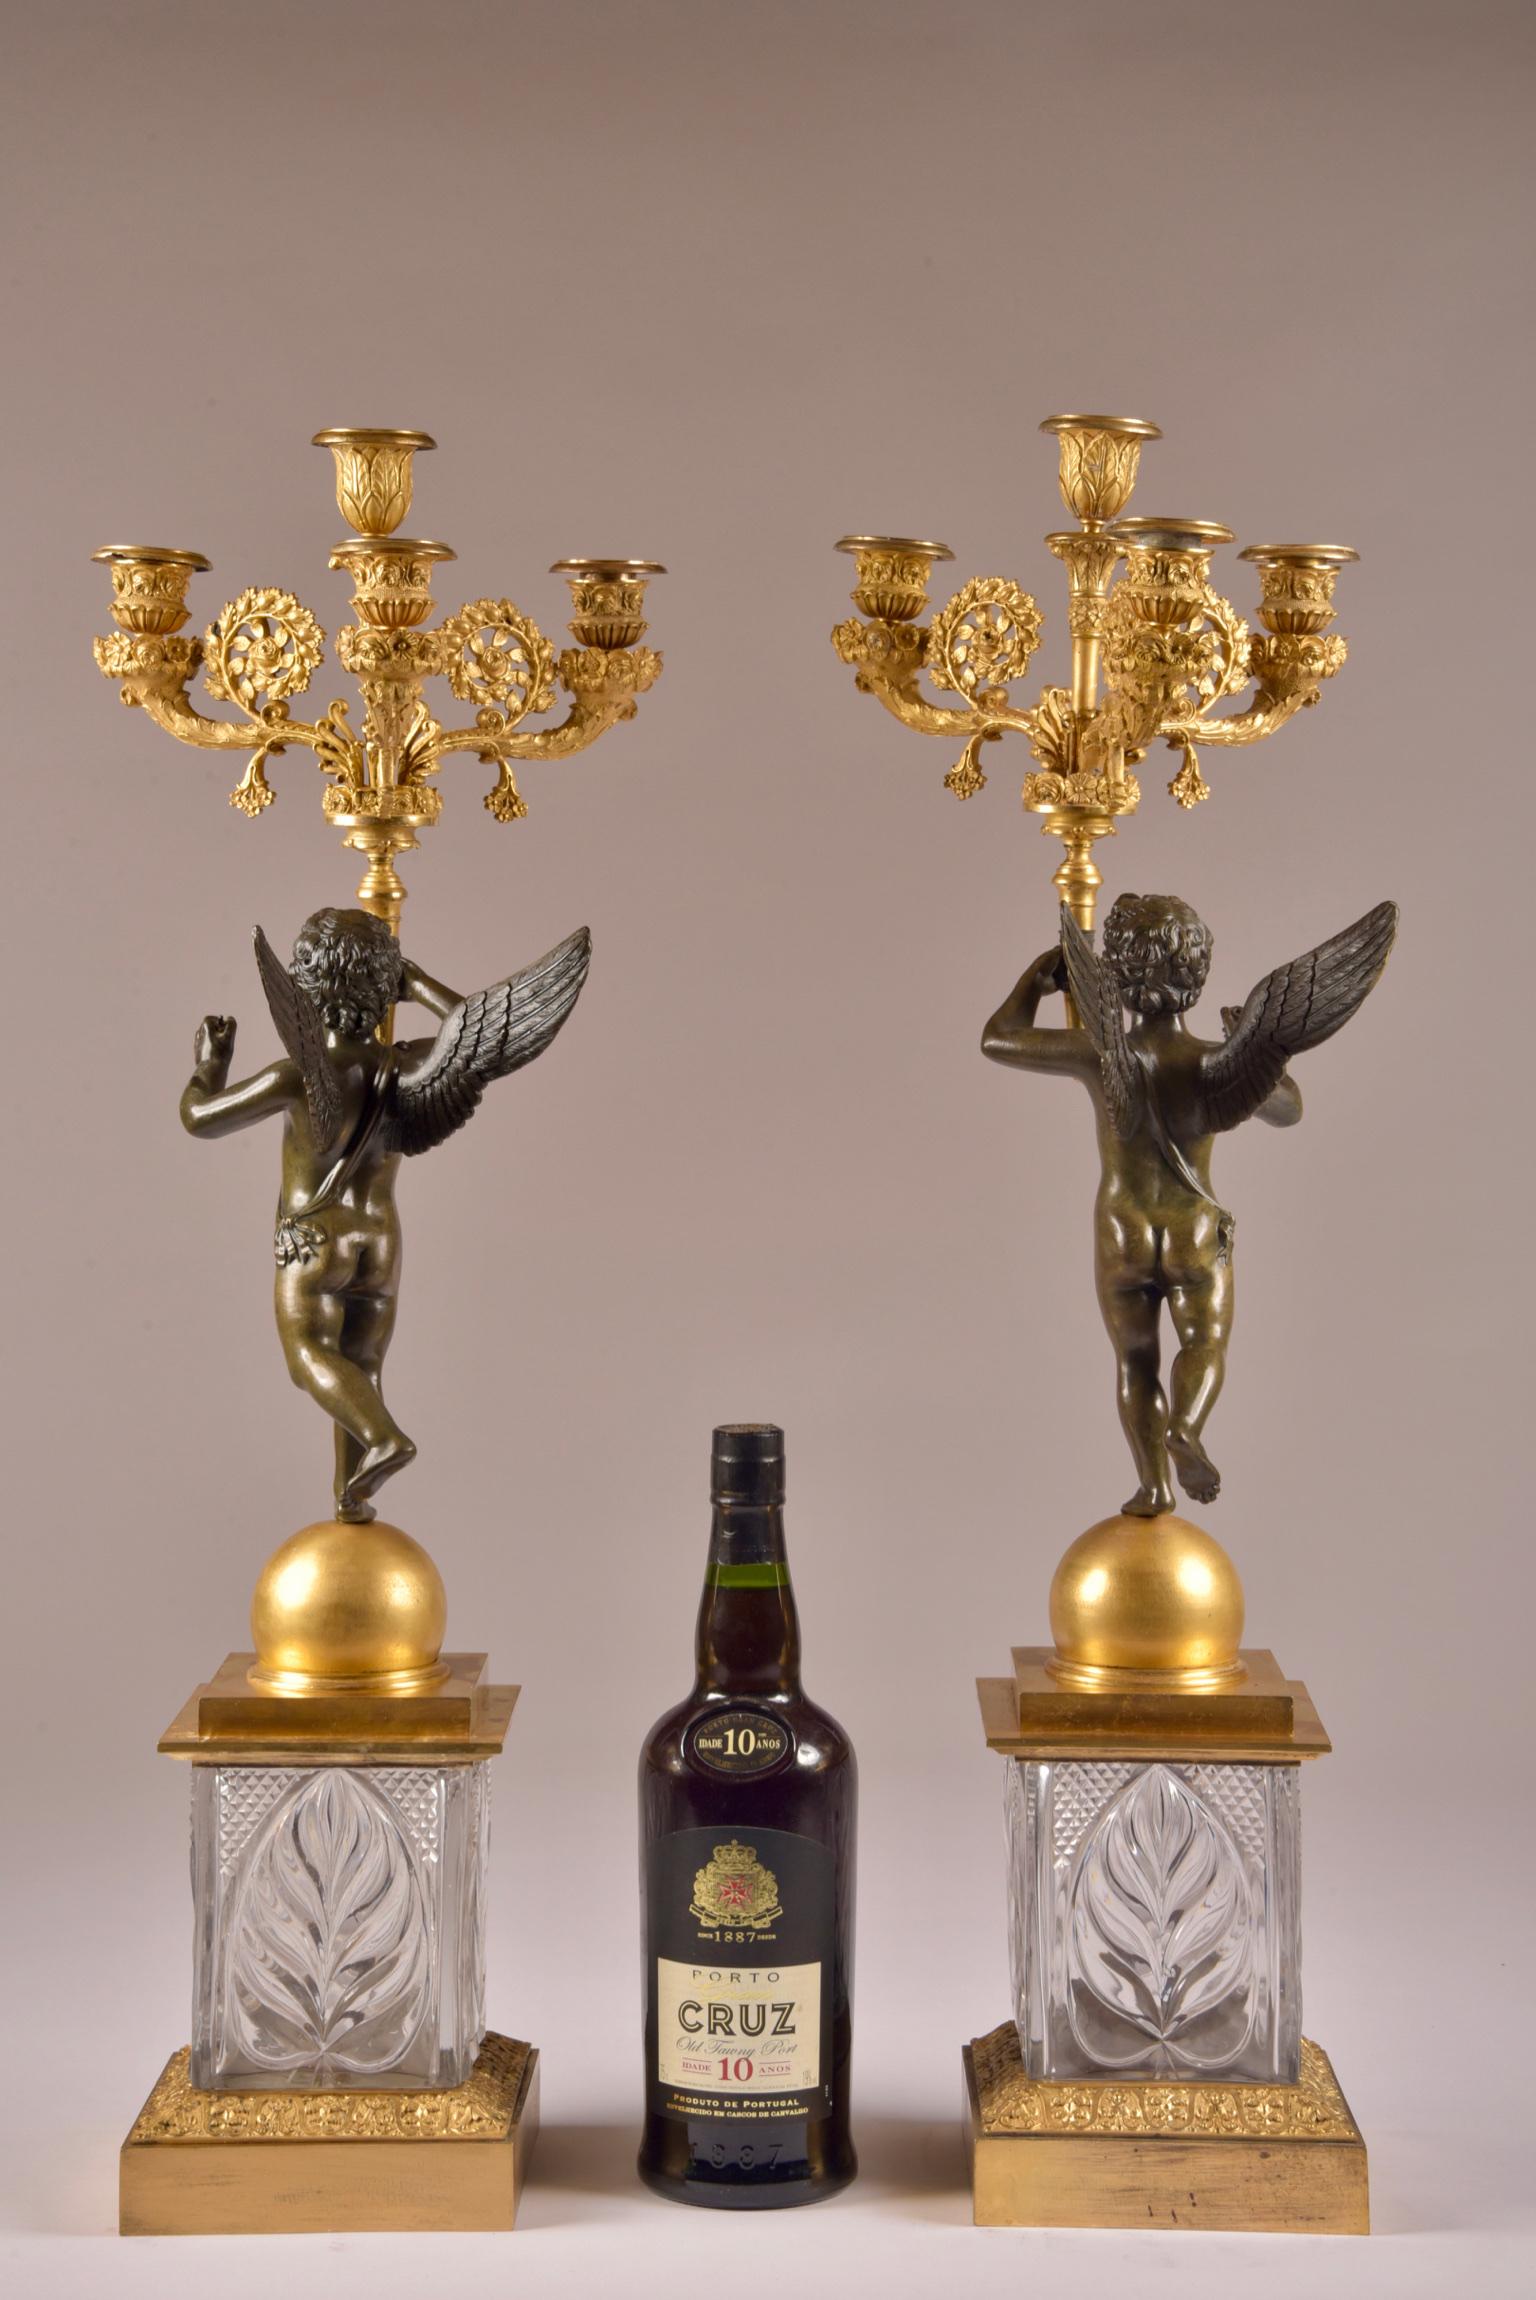 Pair of French Empire Candelabras with Putti, Superb Ormolu Candleholders, 1810  im Angebot 3